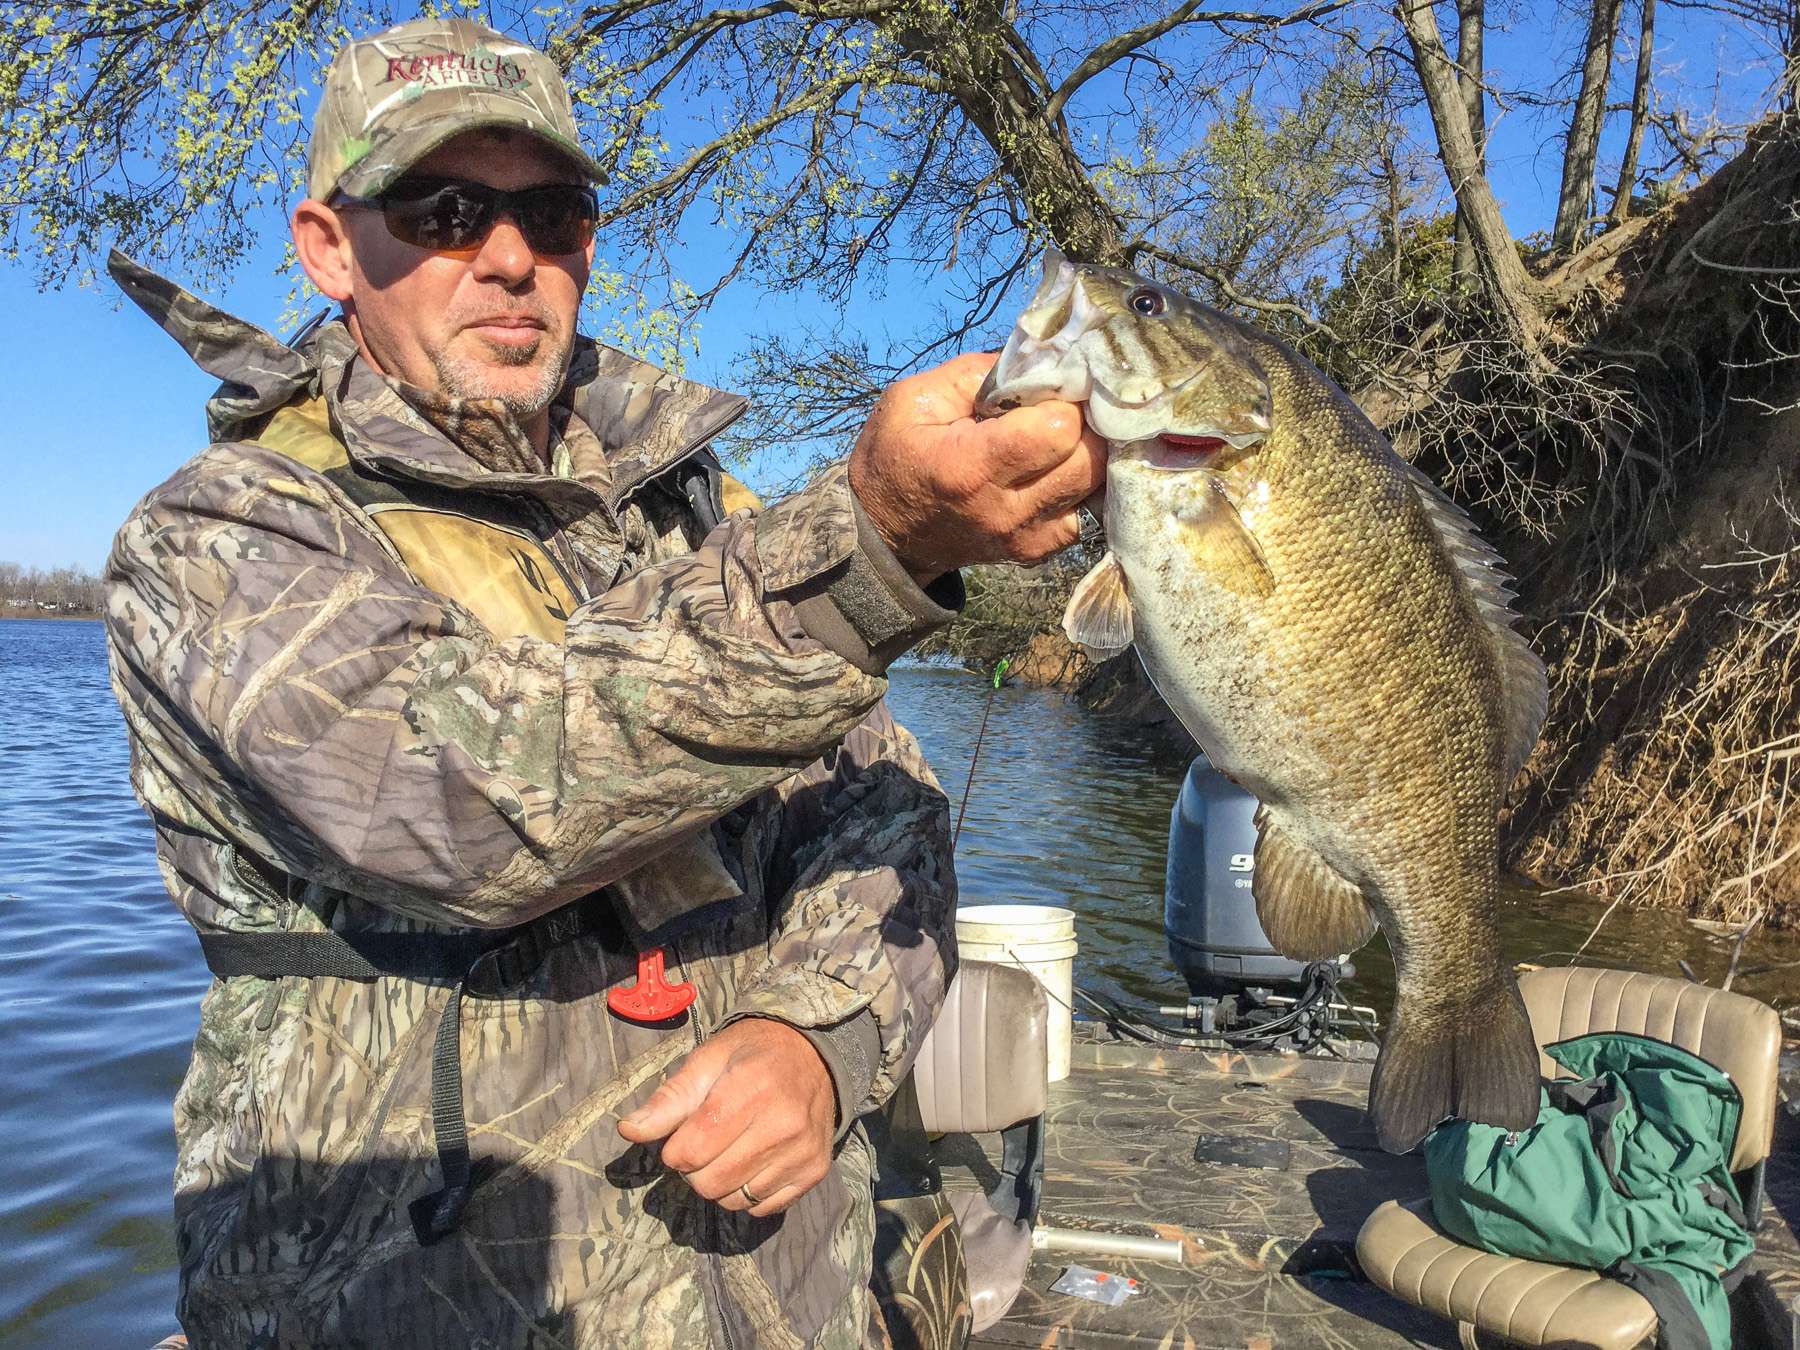 <h4>19. Lake Barkley, Kentucky</h4>
  [58,000 acres] Barkley and its sister, Kentucky Lake, are about on equal footing, says Kentucky fish biologist David Baker. <br><br>âRight now for quality I would put Barkley over Kentucky,â Baker said.<br><br>
Tournament data collected in 2016 by the Department of Fish and Wildlife shows the average weight to win an eight-hour tournament was 16.41 and the average big fish weighed 5.75. A large, three-day tournament here in June 2016 was won with 50-12.